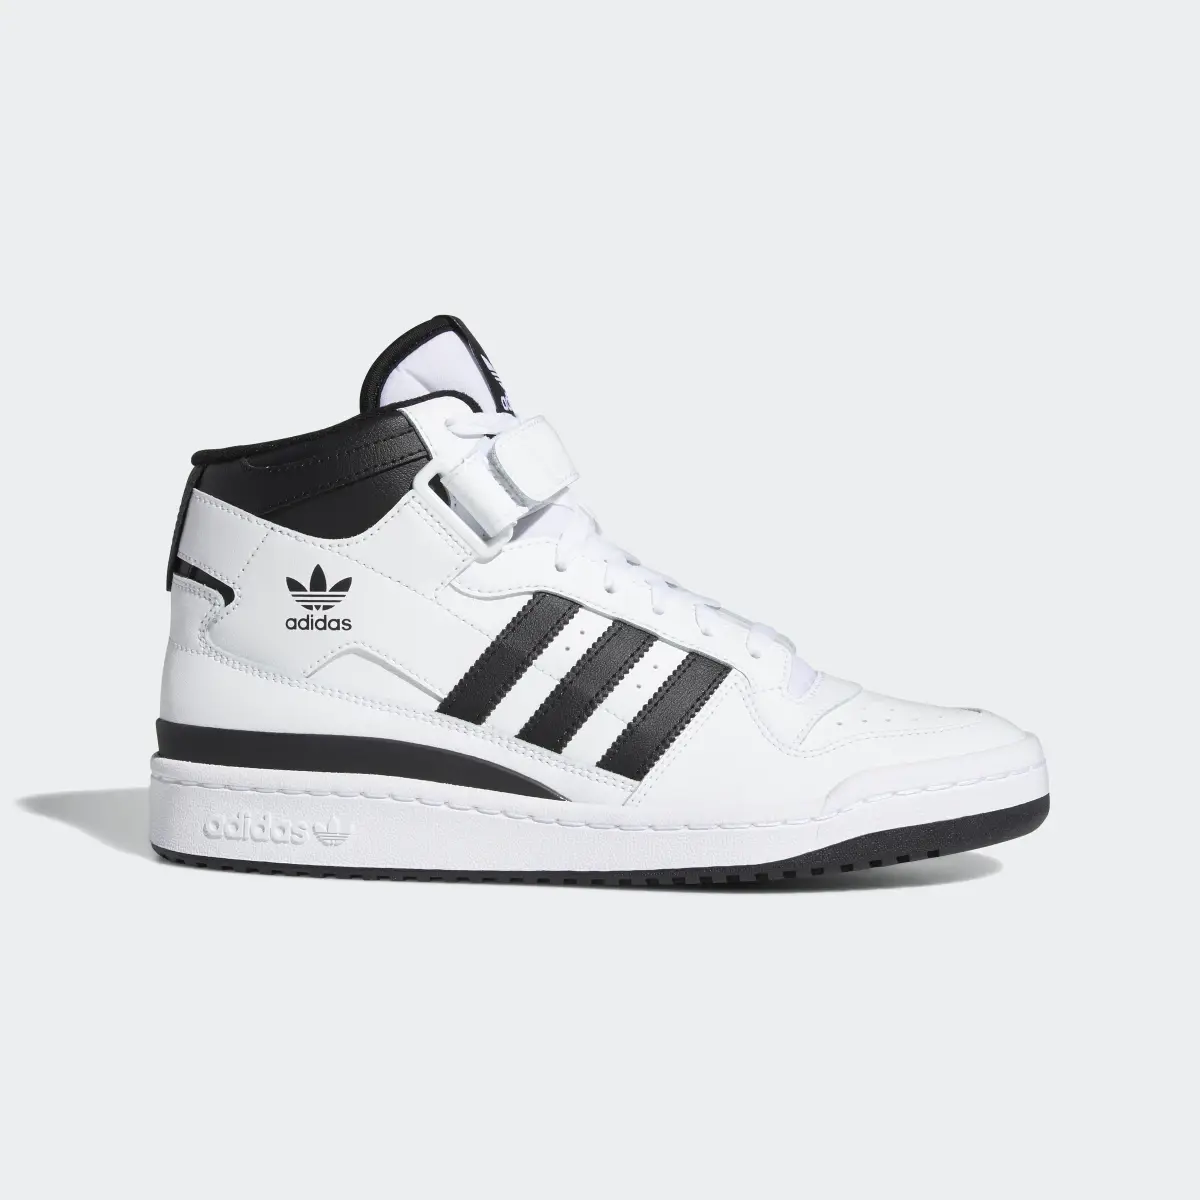 Adidas Forum Mid Shoes. 2